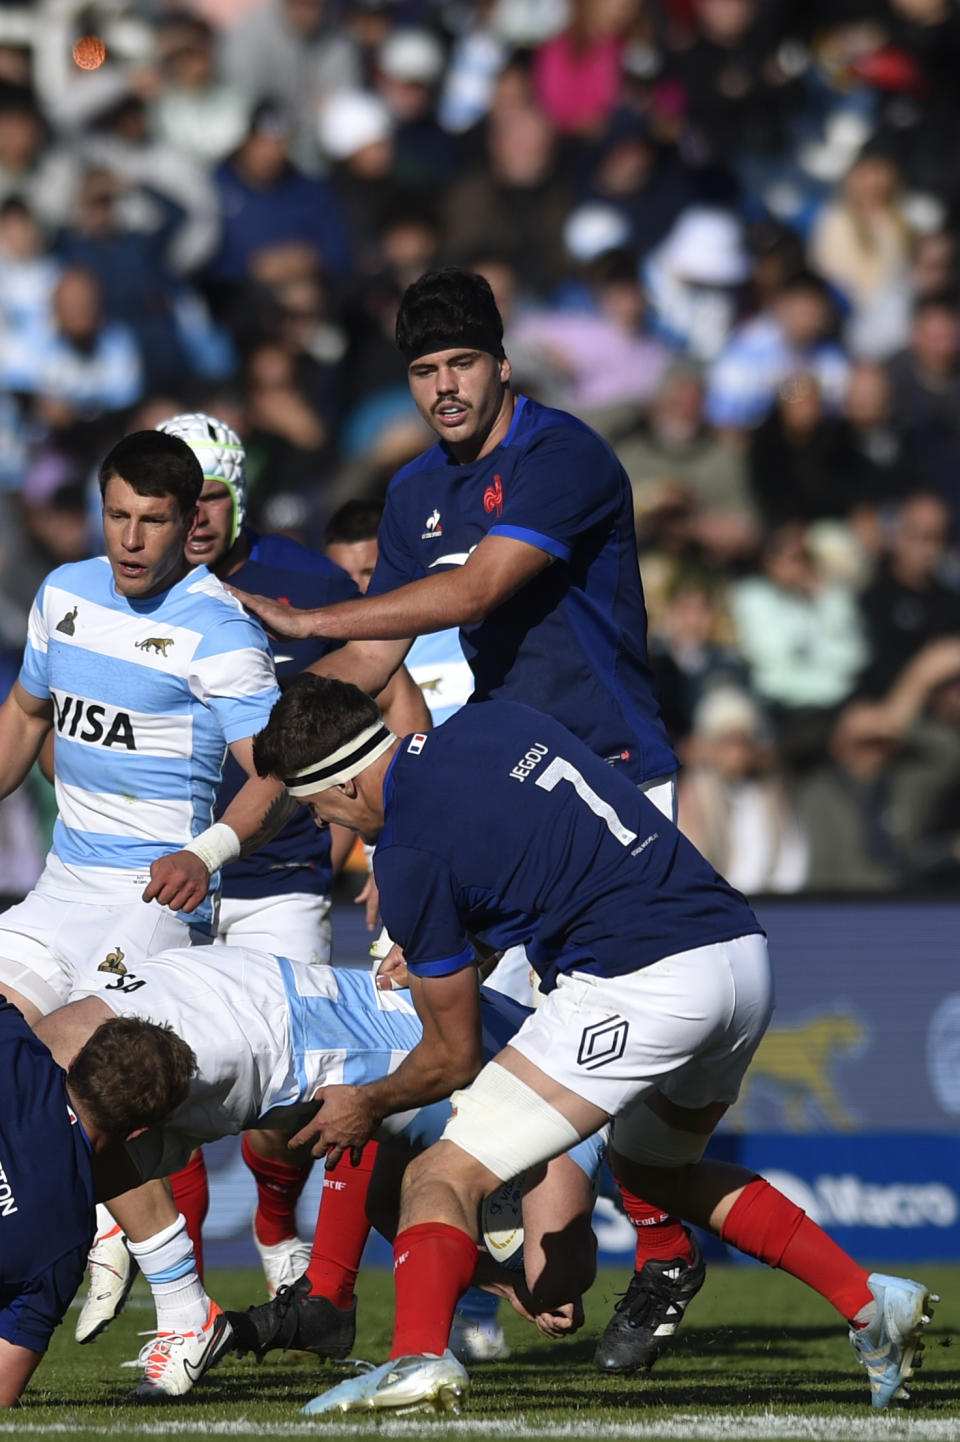 France's Oscar Jegou (7) and France's Hugo Auradou, top right, play a rugby test match against Argentina in Mendoza, Argentina, Saturday, July 6, 2024. (AP Photo/Gustavo Garello)